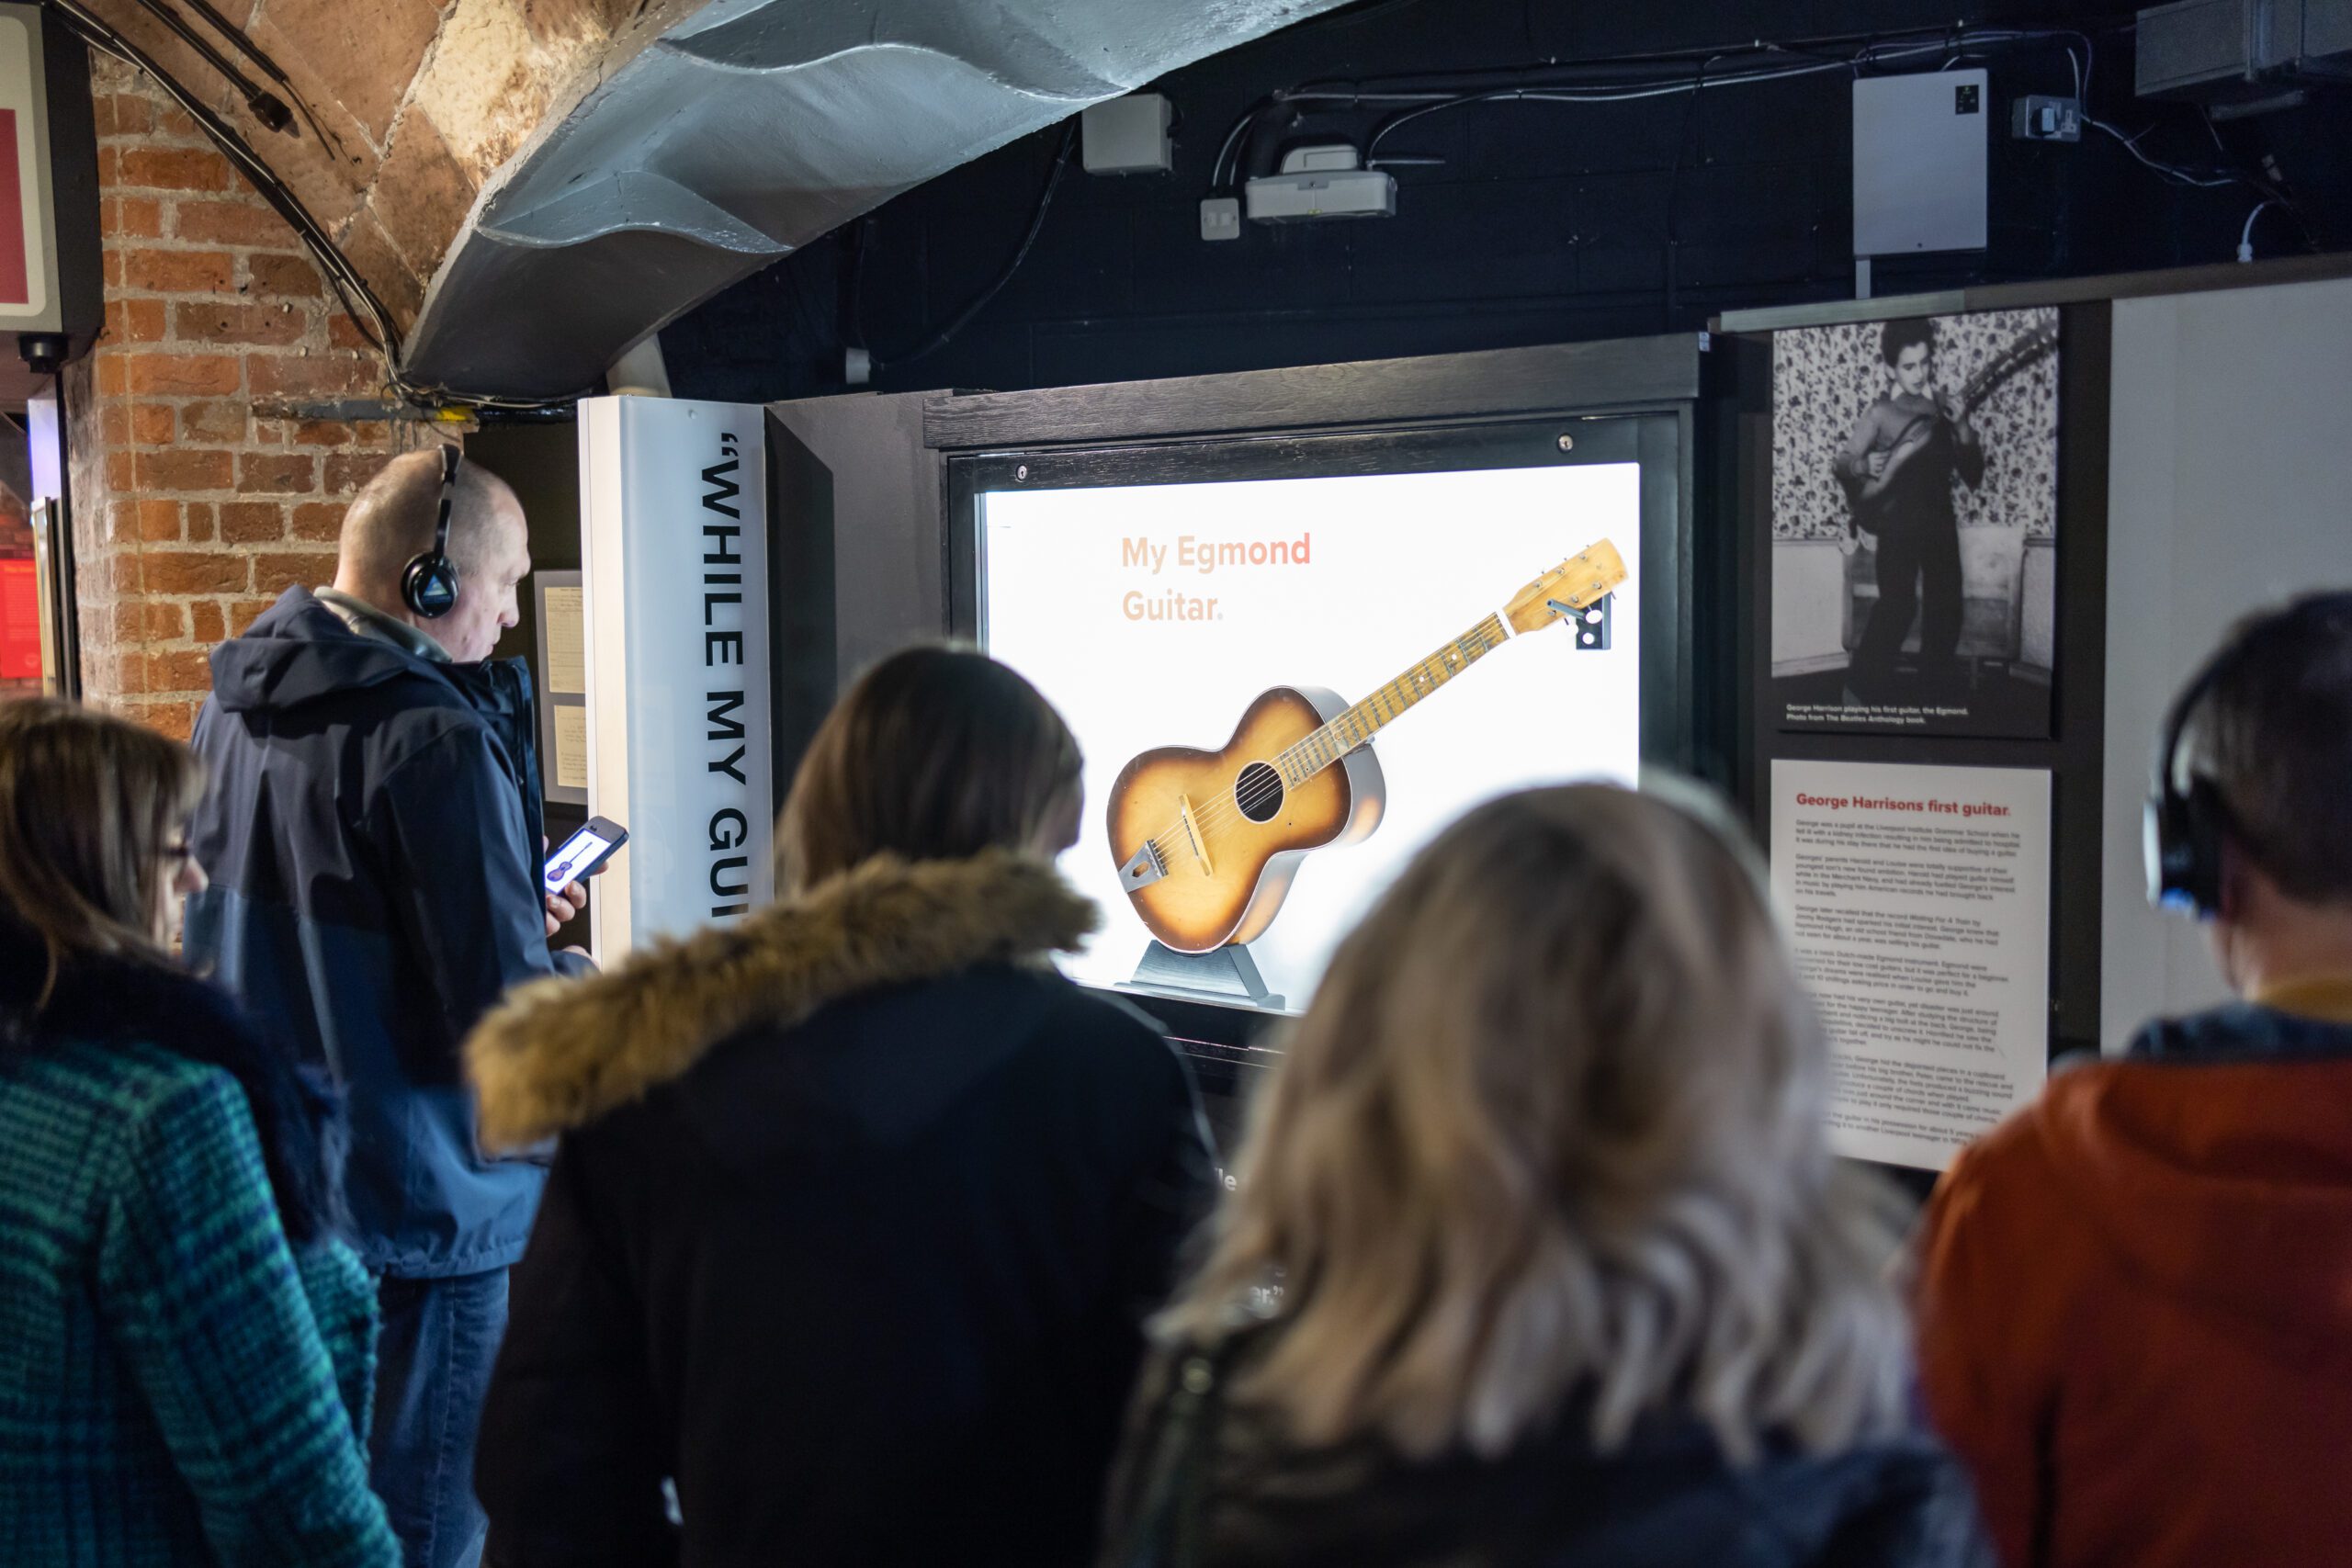 George Harrison's first guitar on display at The Beatles Story Museum Liverpool